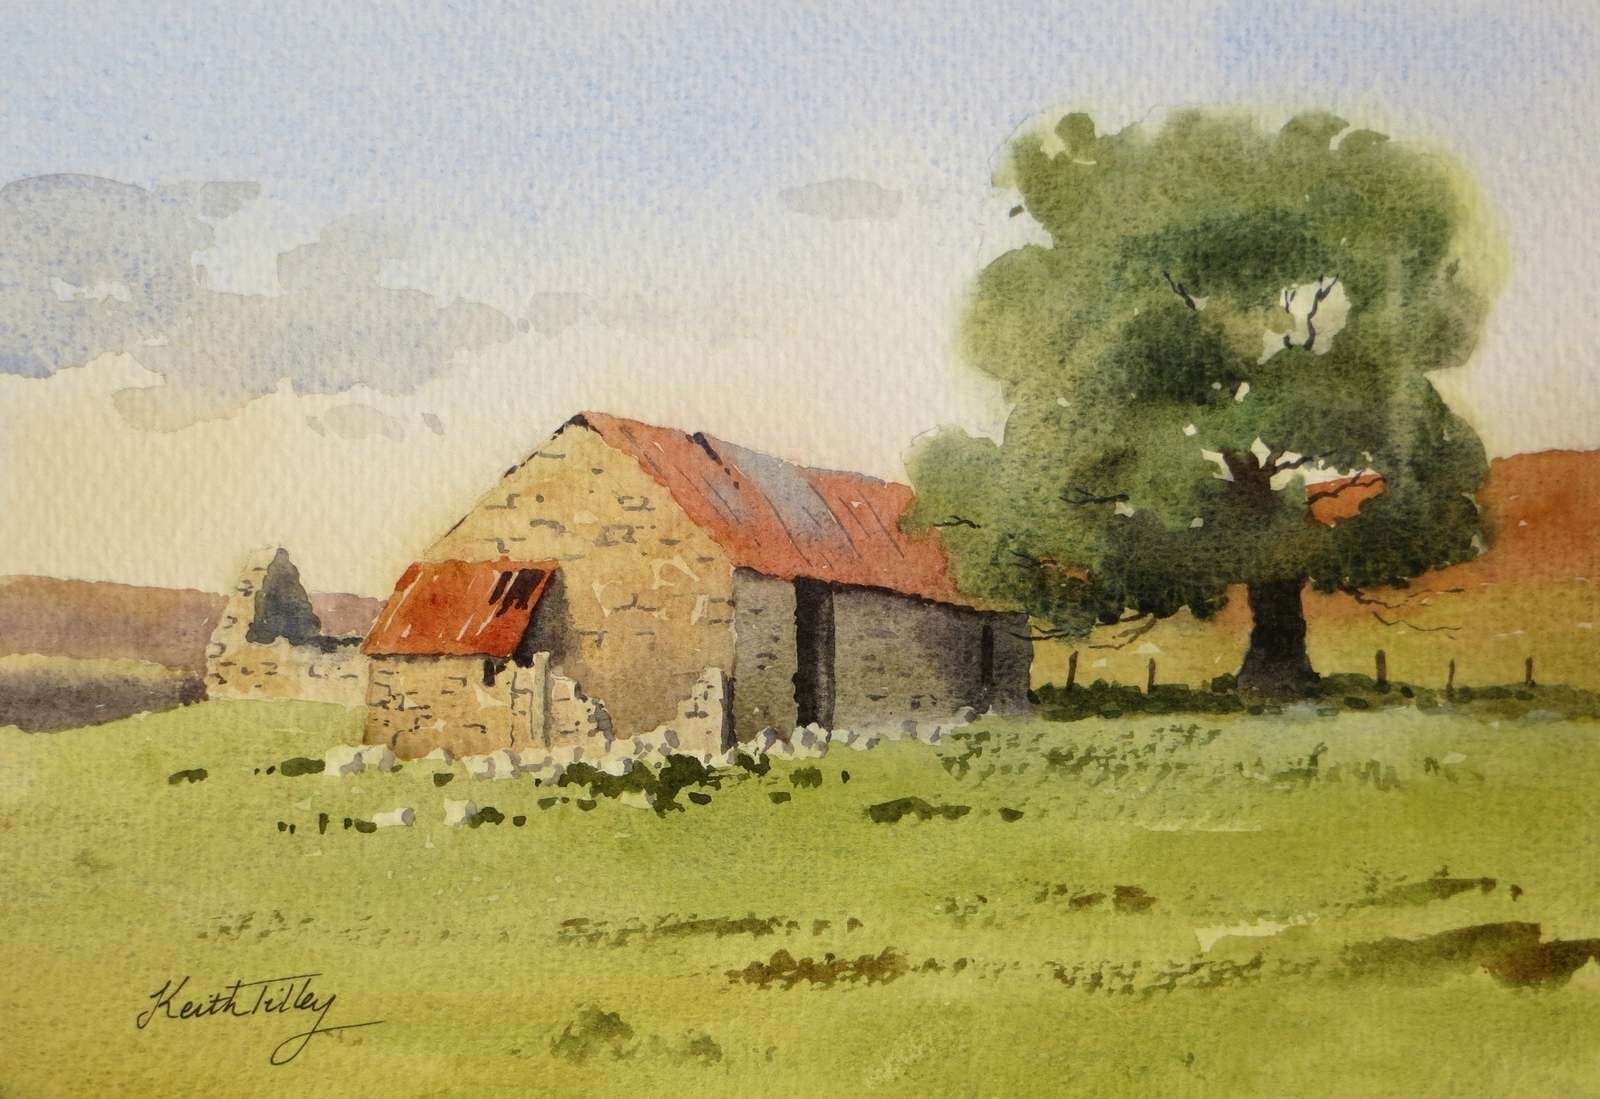 Keith Tilley is a landscape painter primarily using watercolour.